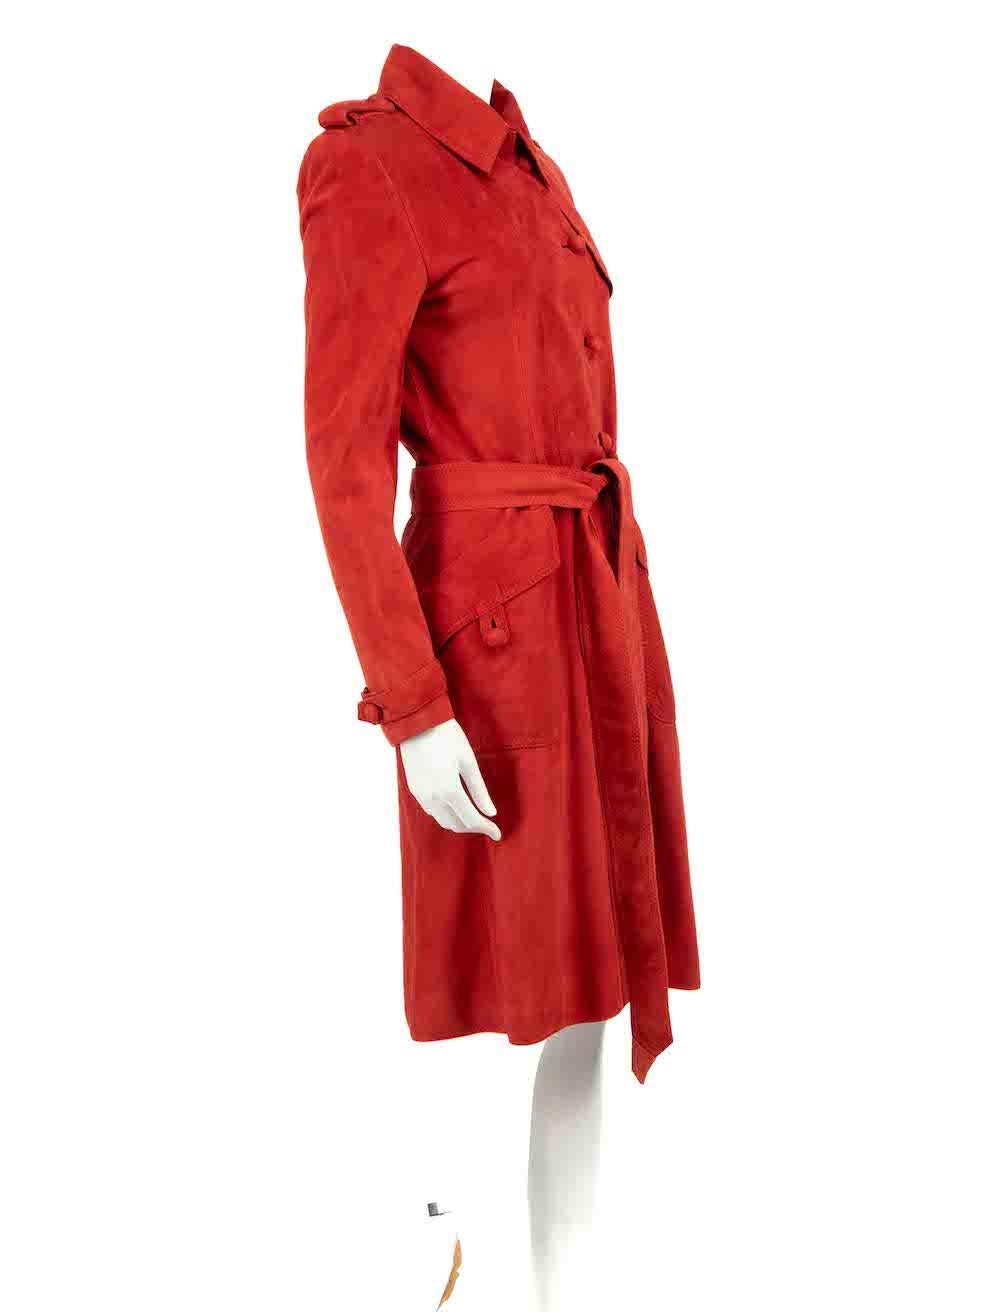 CONDITION is Good. Minor wear to coat is evident. Light wear to the exterior with some very mild abrasion to the pile seen throughout, particularly at the cuffs on this used Givenchy designer resale item.
 
Details
Red
Suede
Long coat
Belted
Double